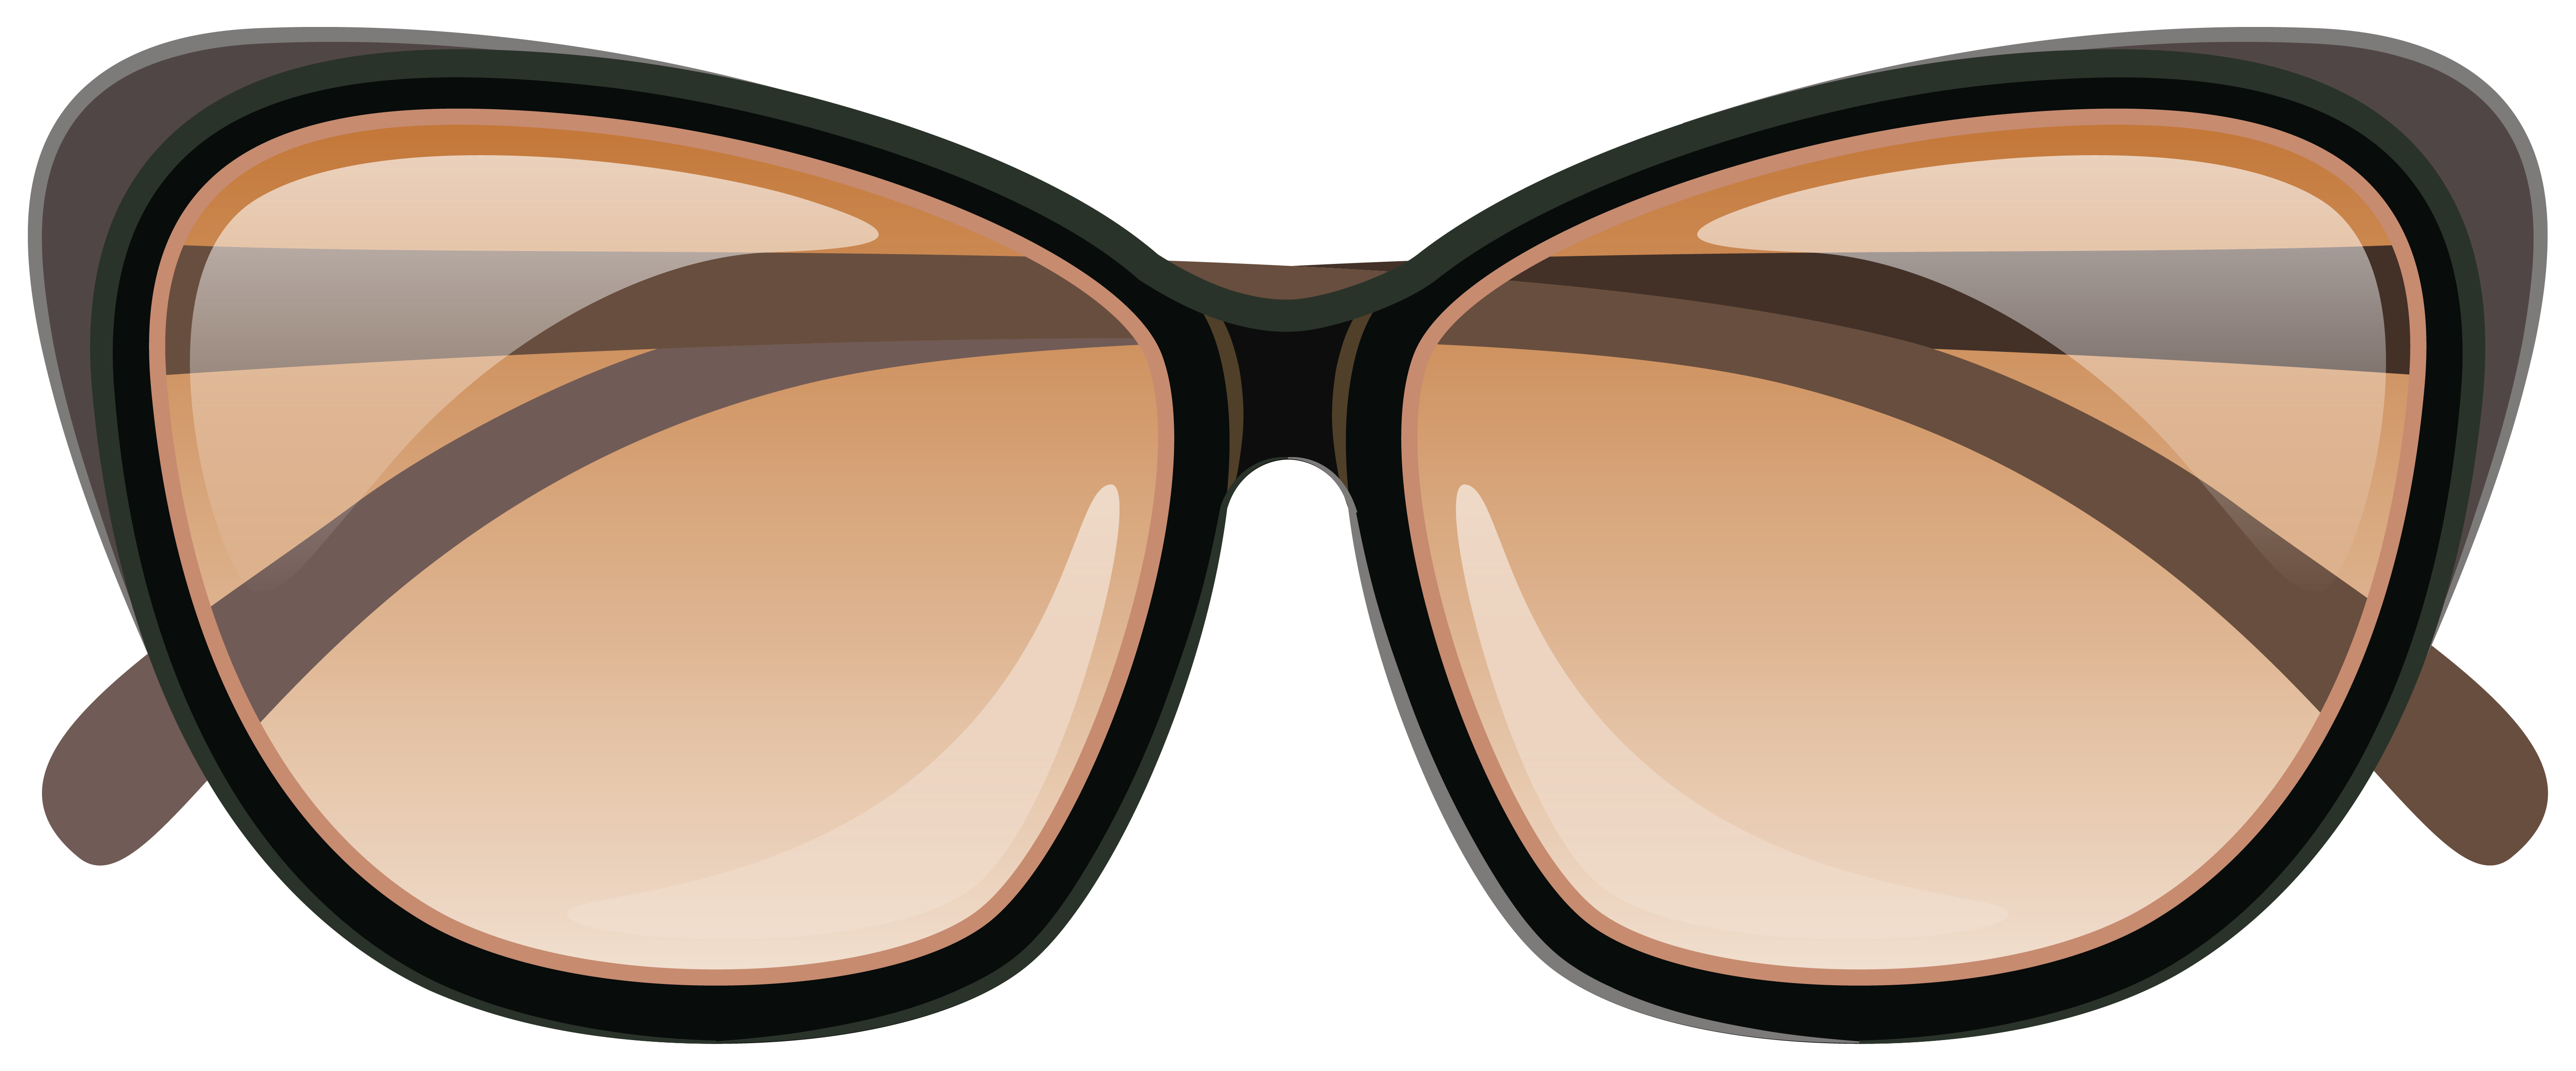 Goggles clipart brown glass. Sunglasses png image gallery